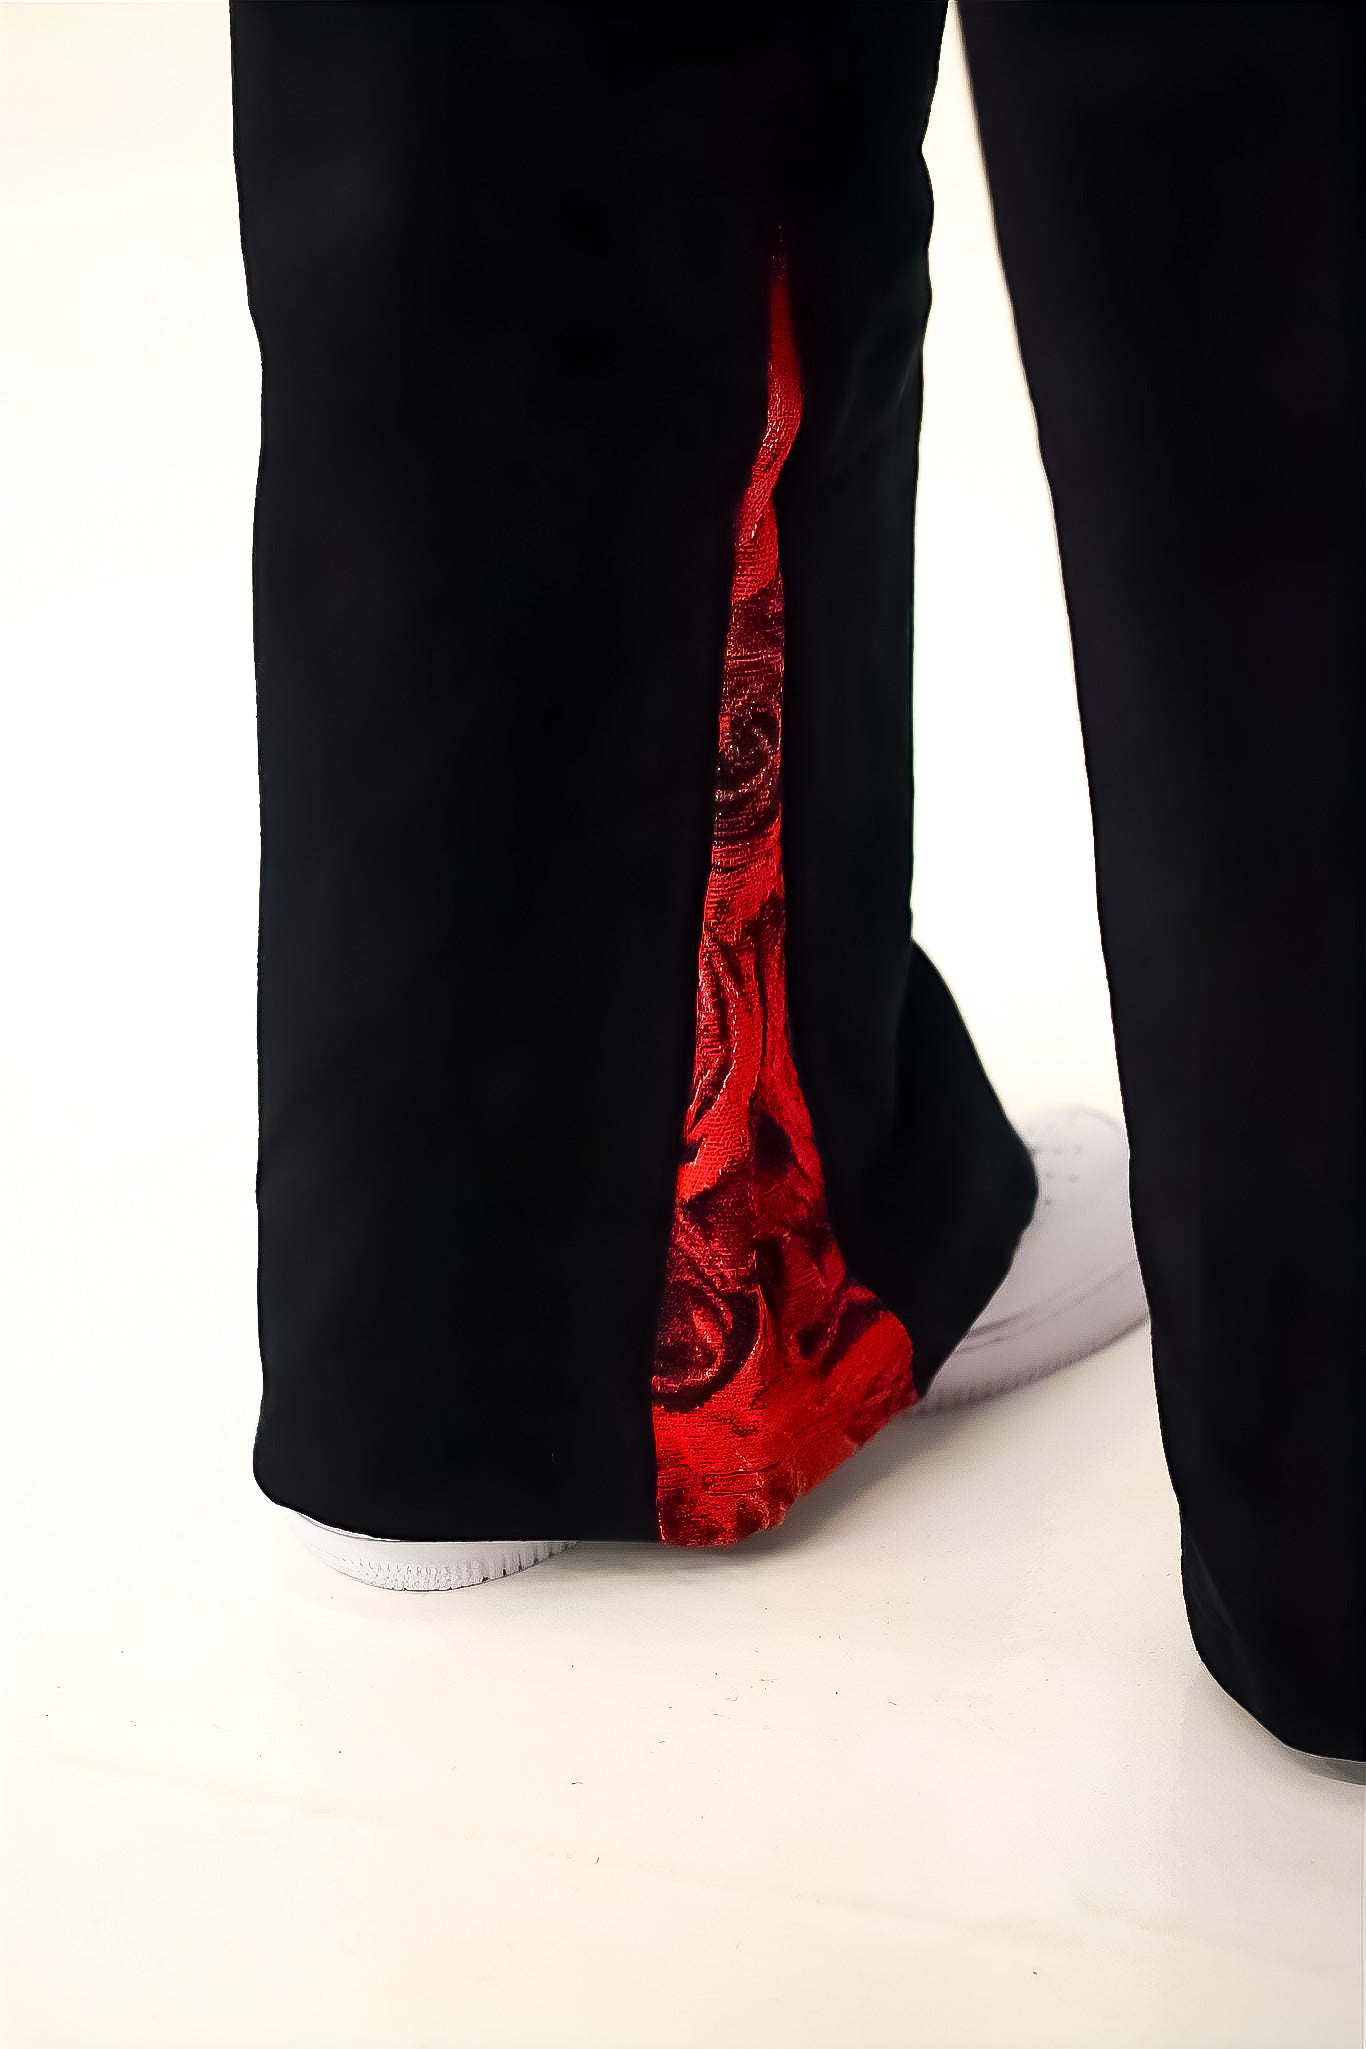 Chinchilla Living "Doves & Roses" Flare Sweatpants Black & Red